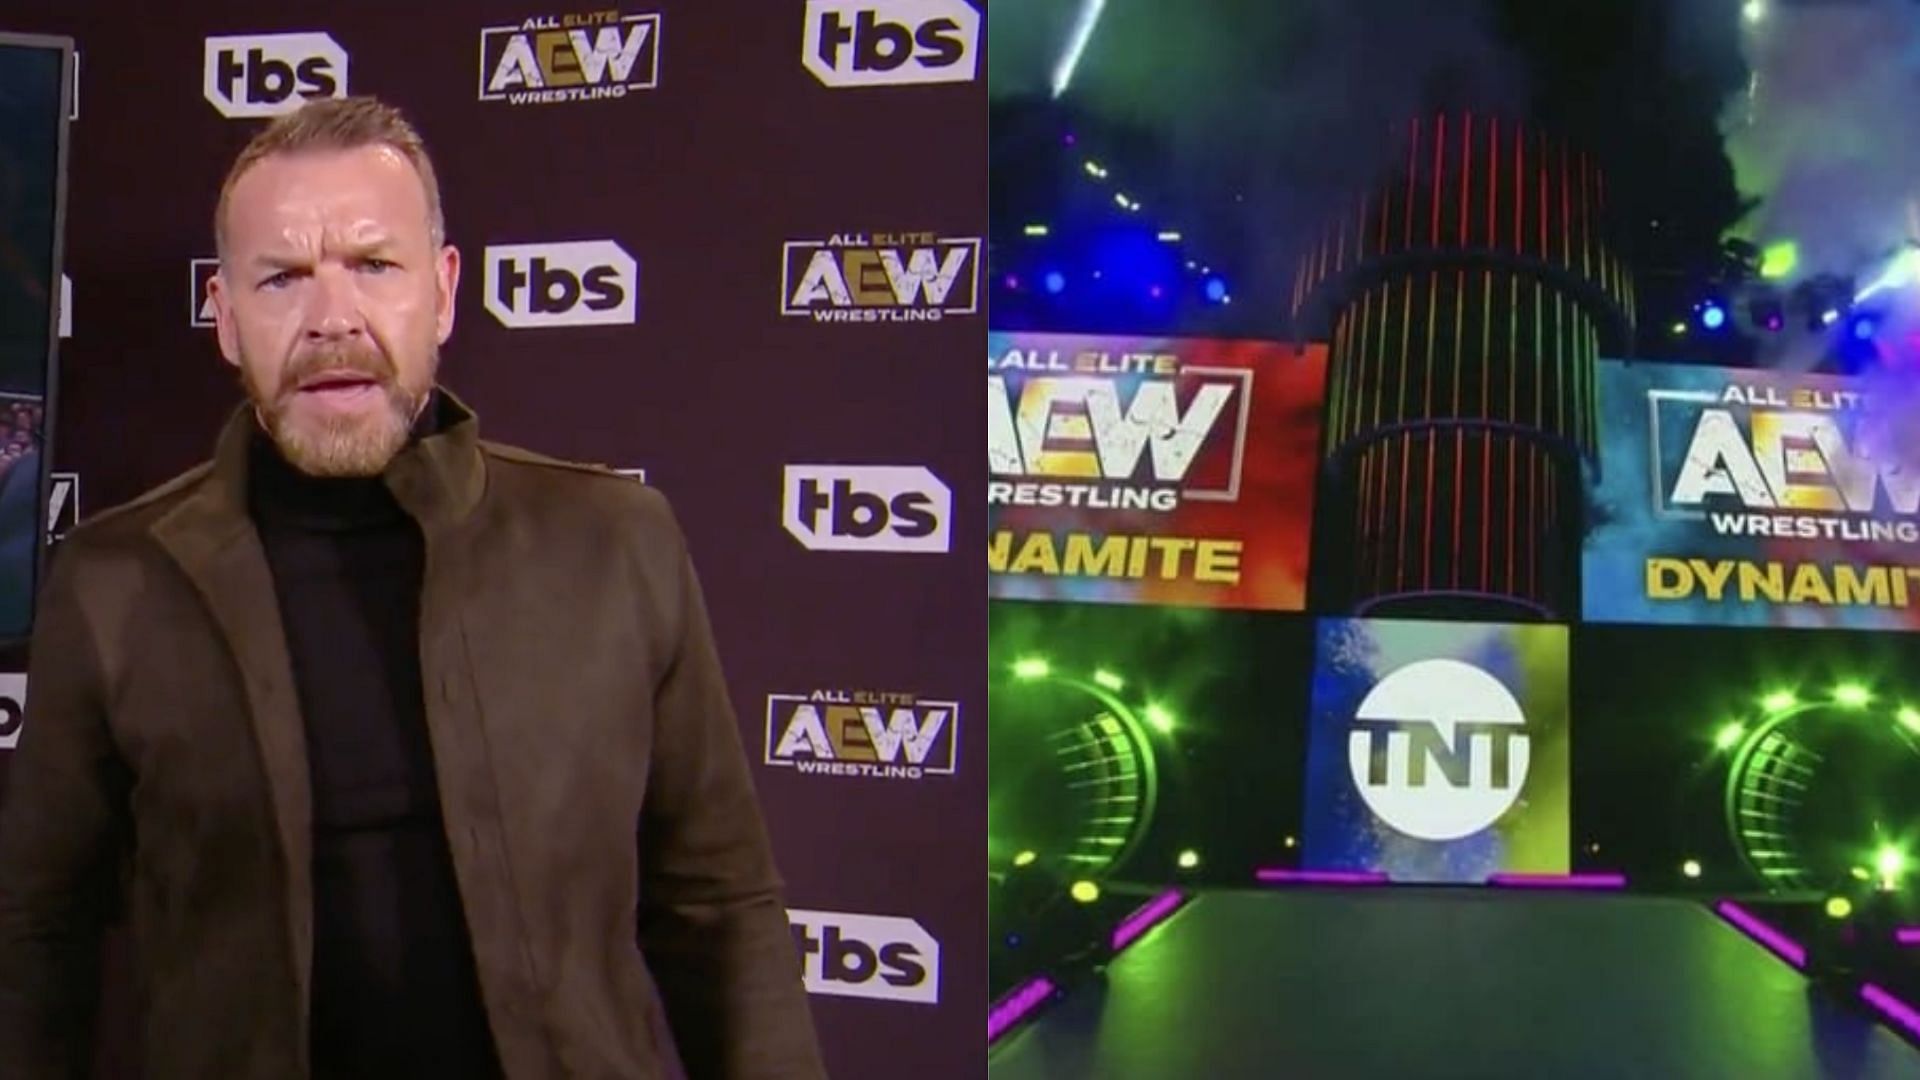 Christian Cage (left); AEW Dynamite entrance ramp (right)